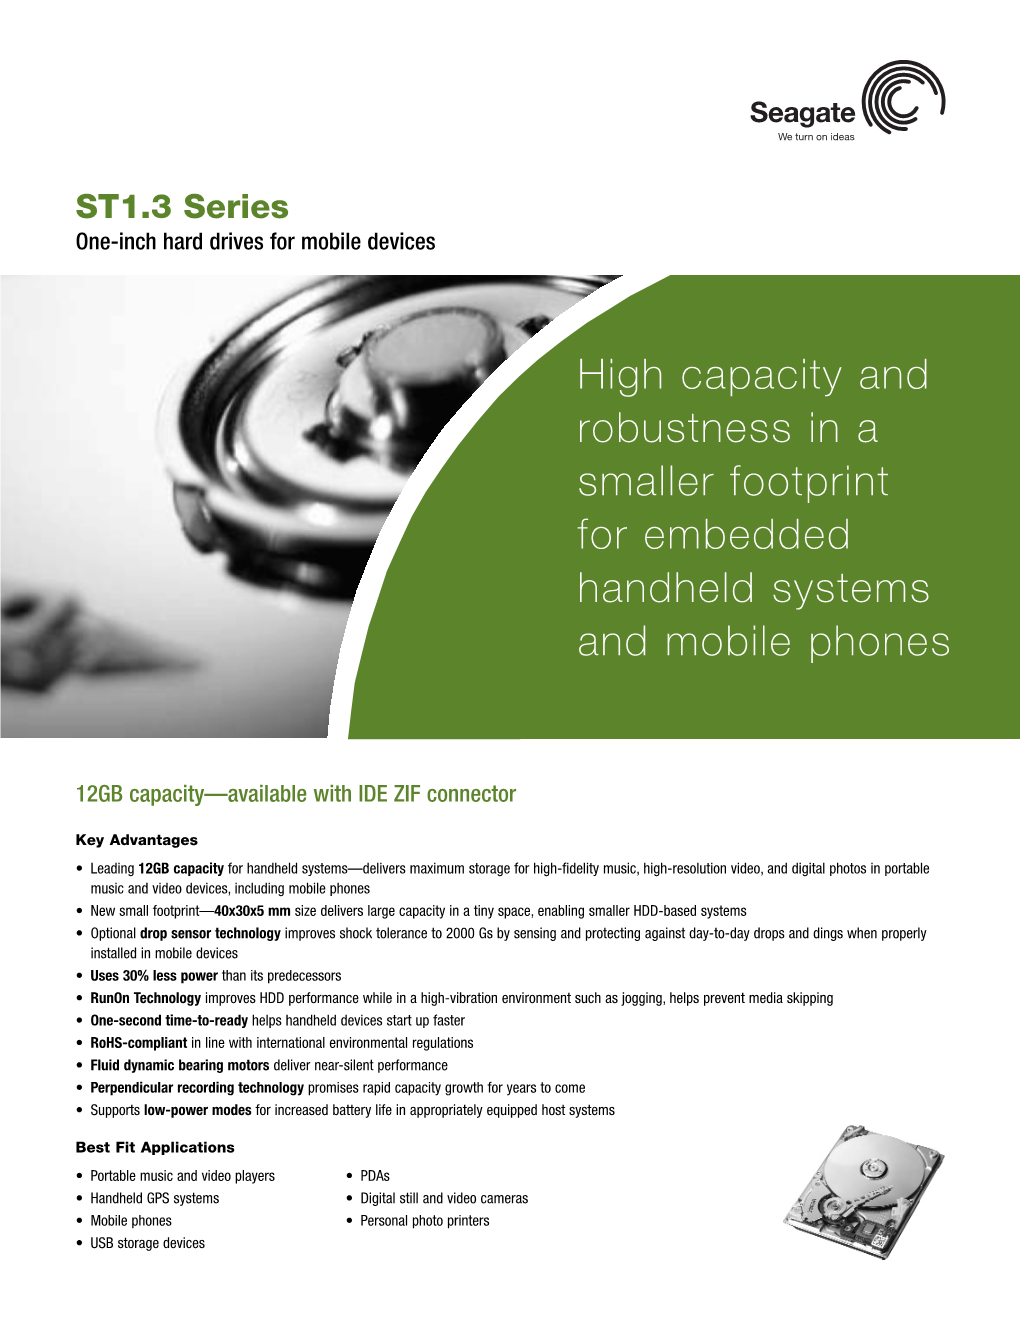 High Capacity and Robustness in a Smaller Footprint for Embedded Handheld Systems and Mobile Phones